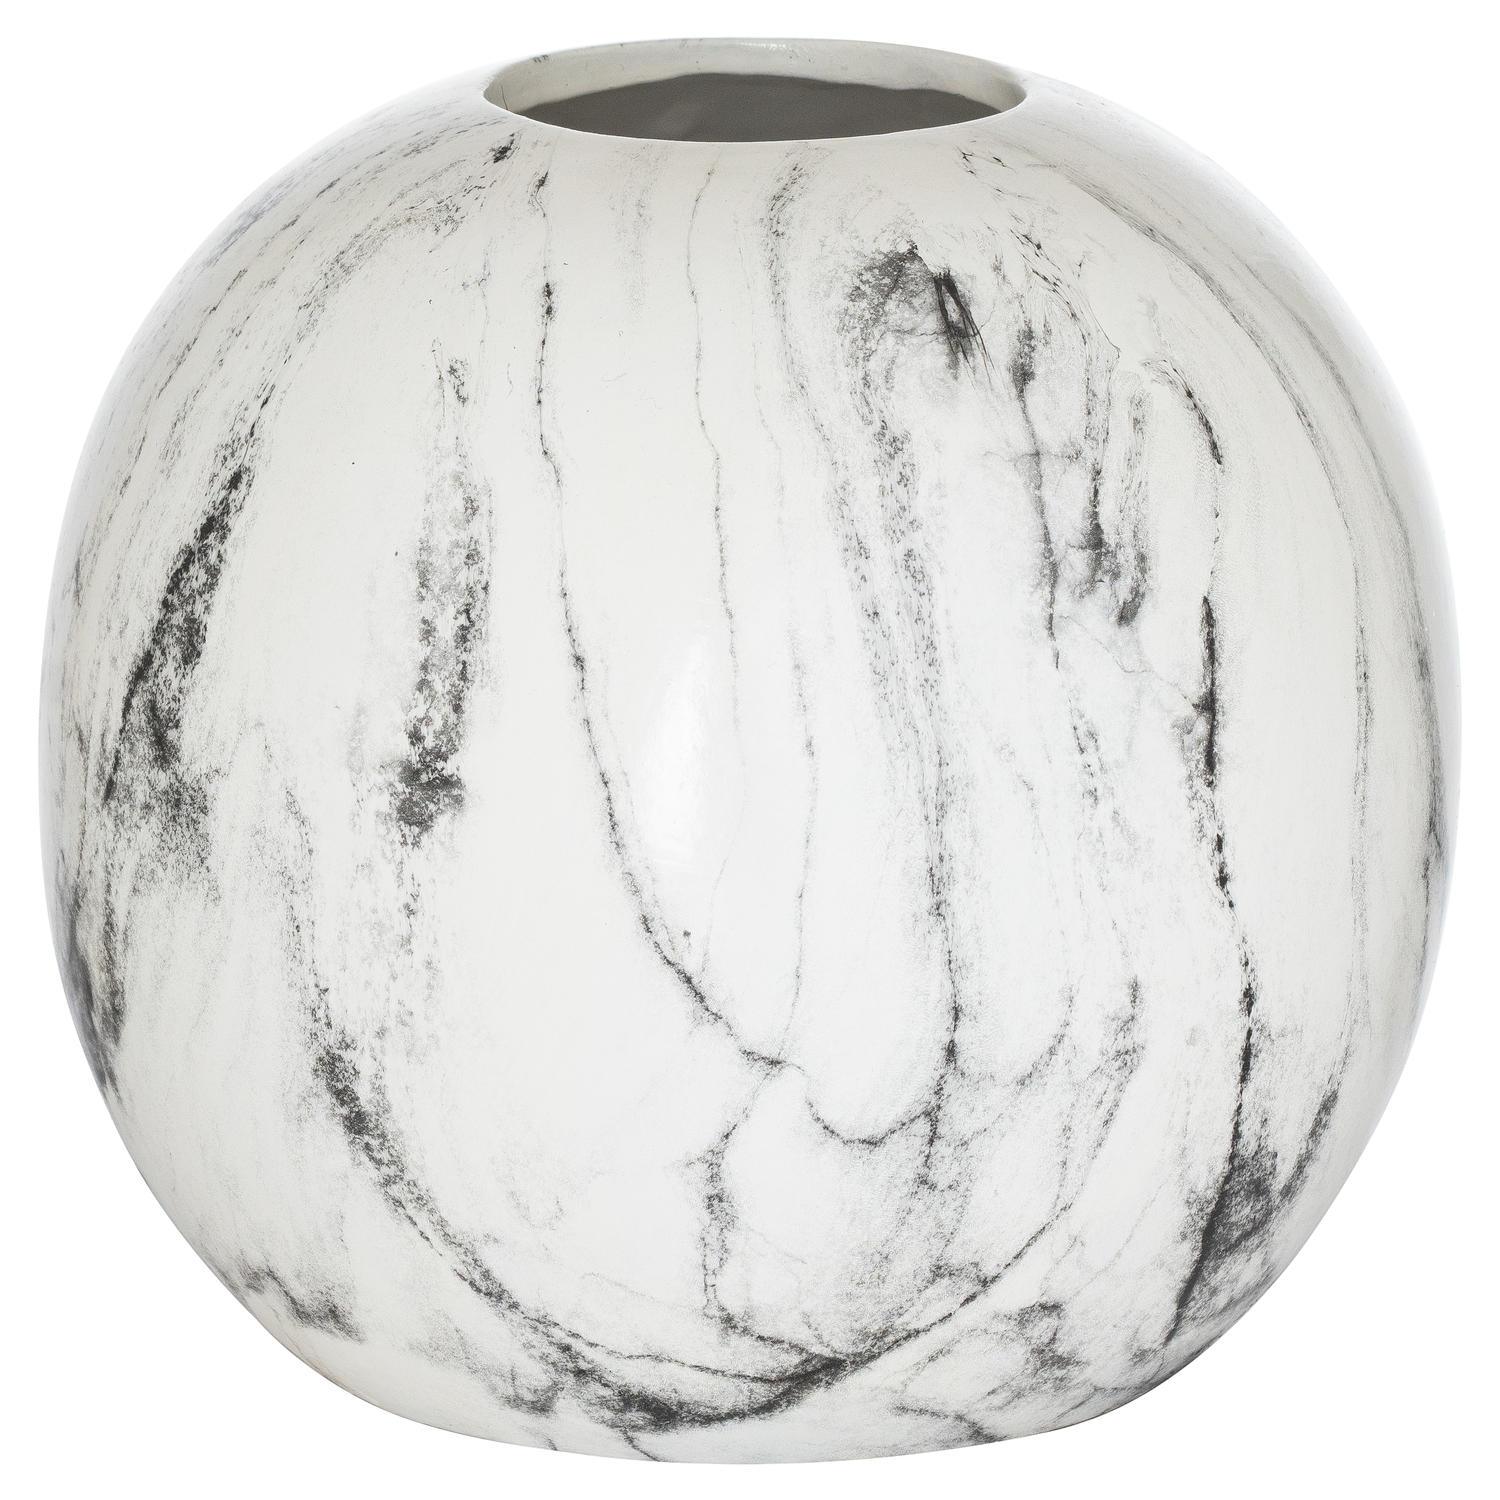 View Marble Pudding Vase information